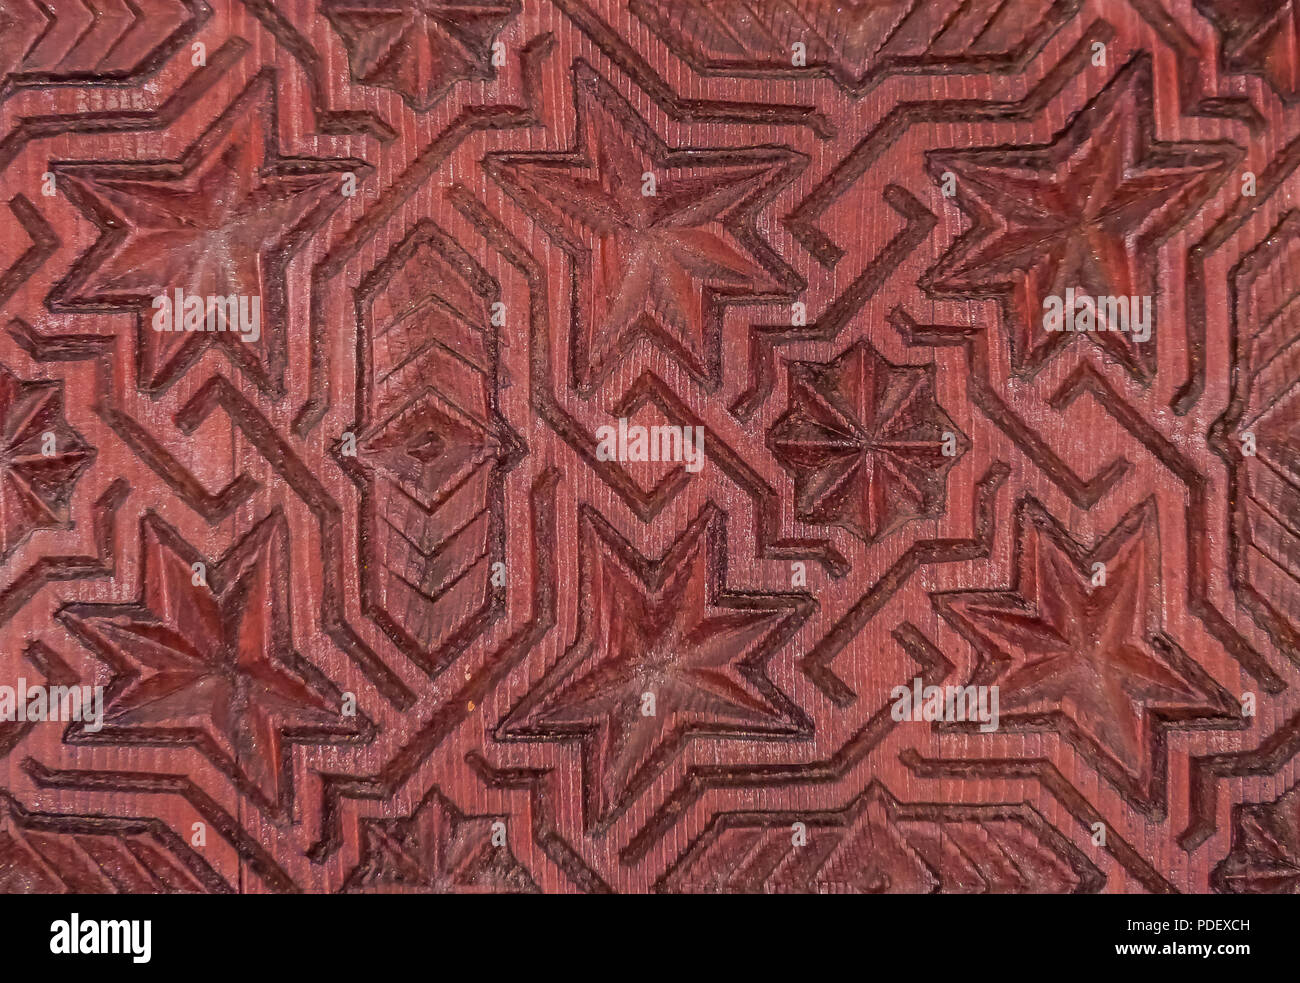 Wood carving of geometrical pattern on a door in Marakech, Morocco Stock Photo